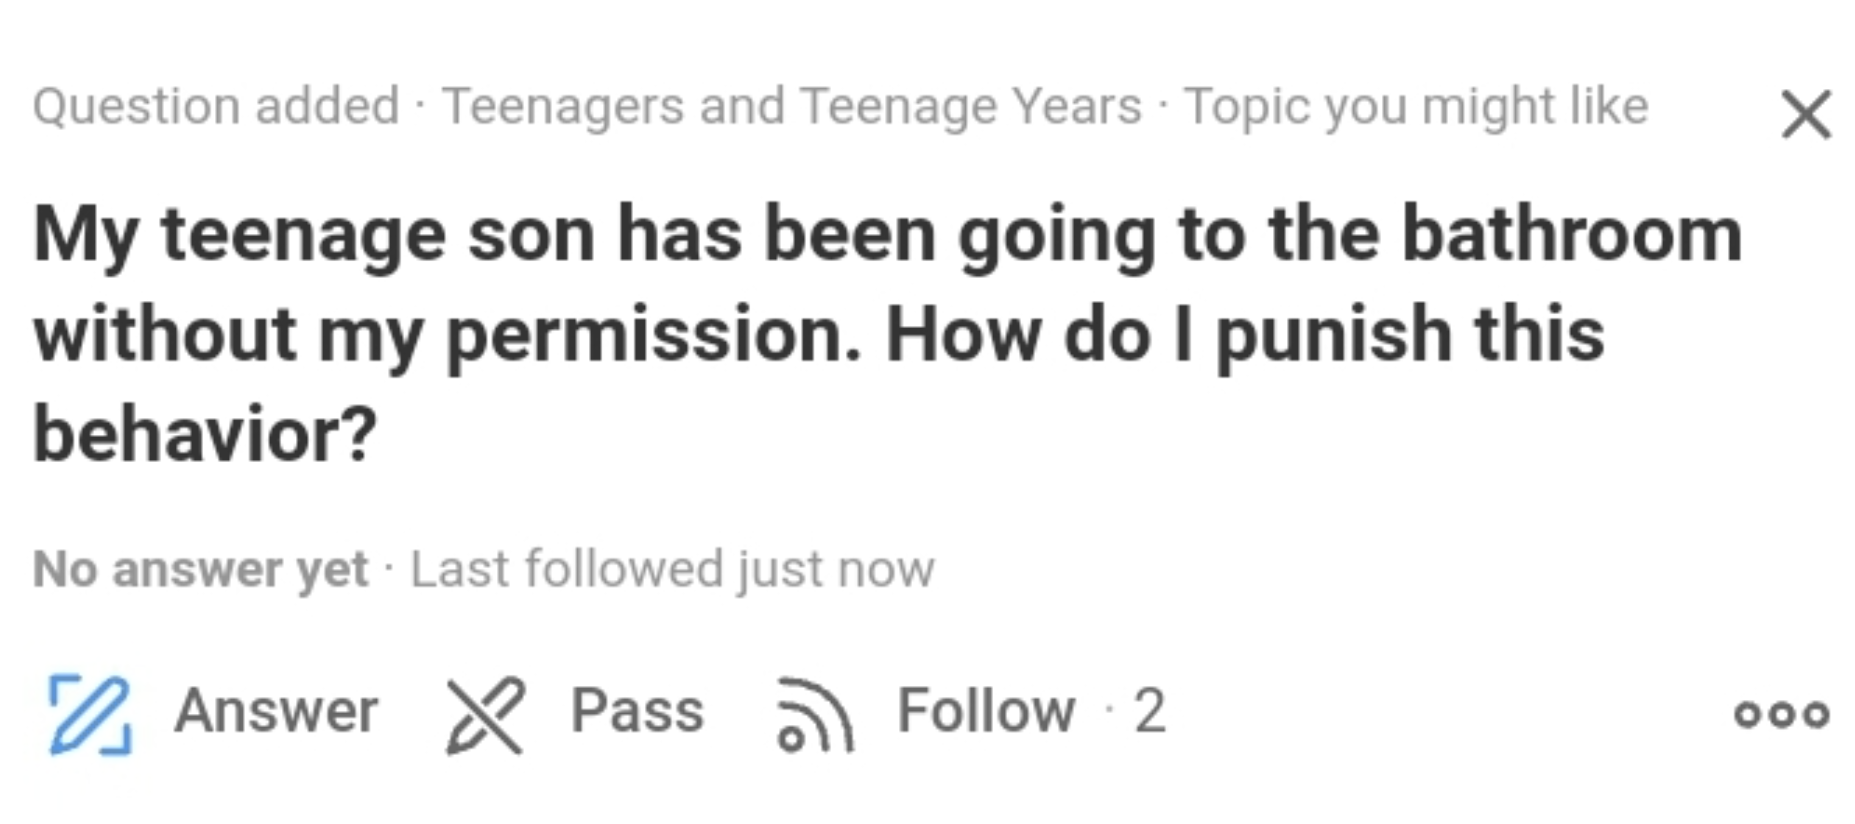 number - Question added Teenagers and Teenage Years Topic you might My teenage son has been going to the bathroom without my permission. How do I punish this behavior? No answer yet. Last ed just now 0 Answer Pass .2 ooo